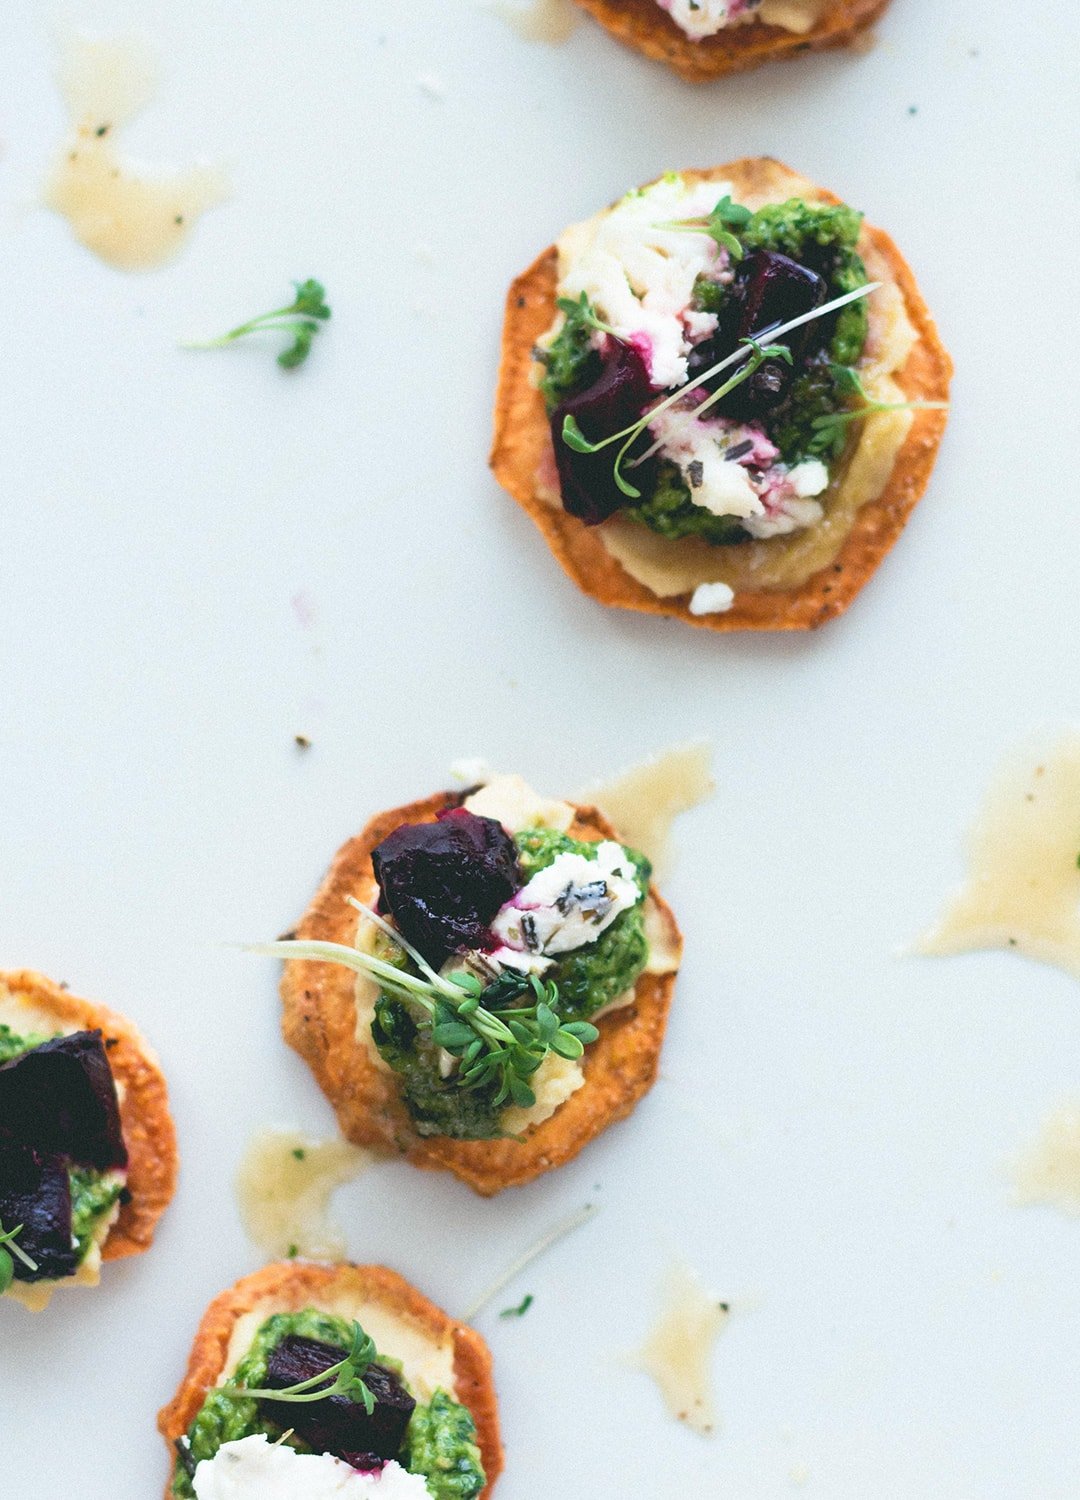 Sweet Potato Rounds with Hummus, Arugula Basil Pesto, Goat Cheese, Roasted Beets, Sprouts, and a drizzle of honey. Can be made vegan too! Gluten-free. | thehealthfulideas.com